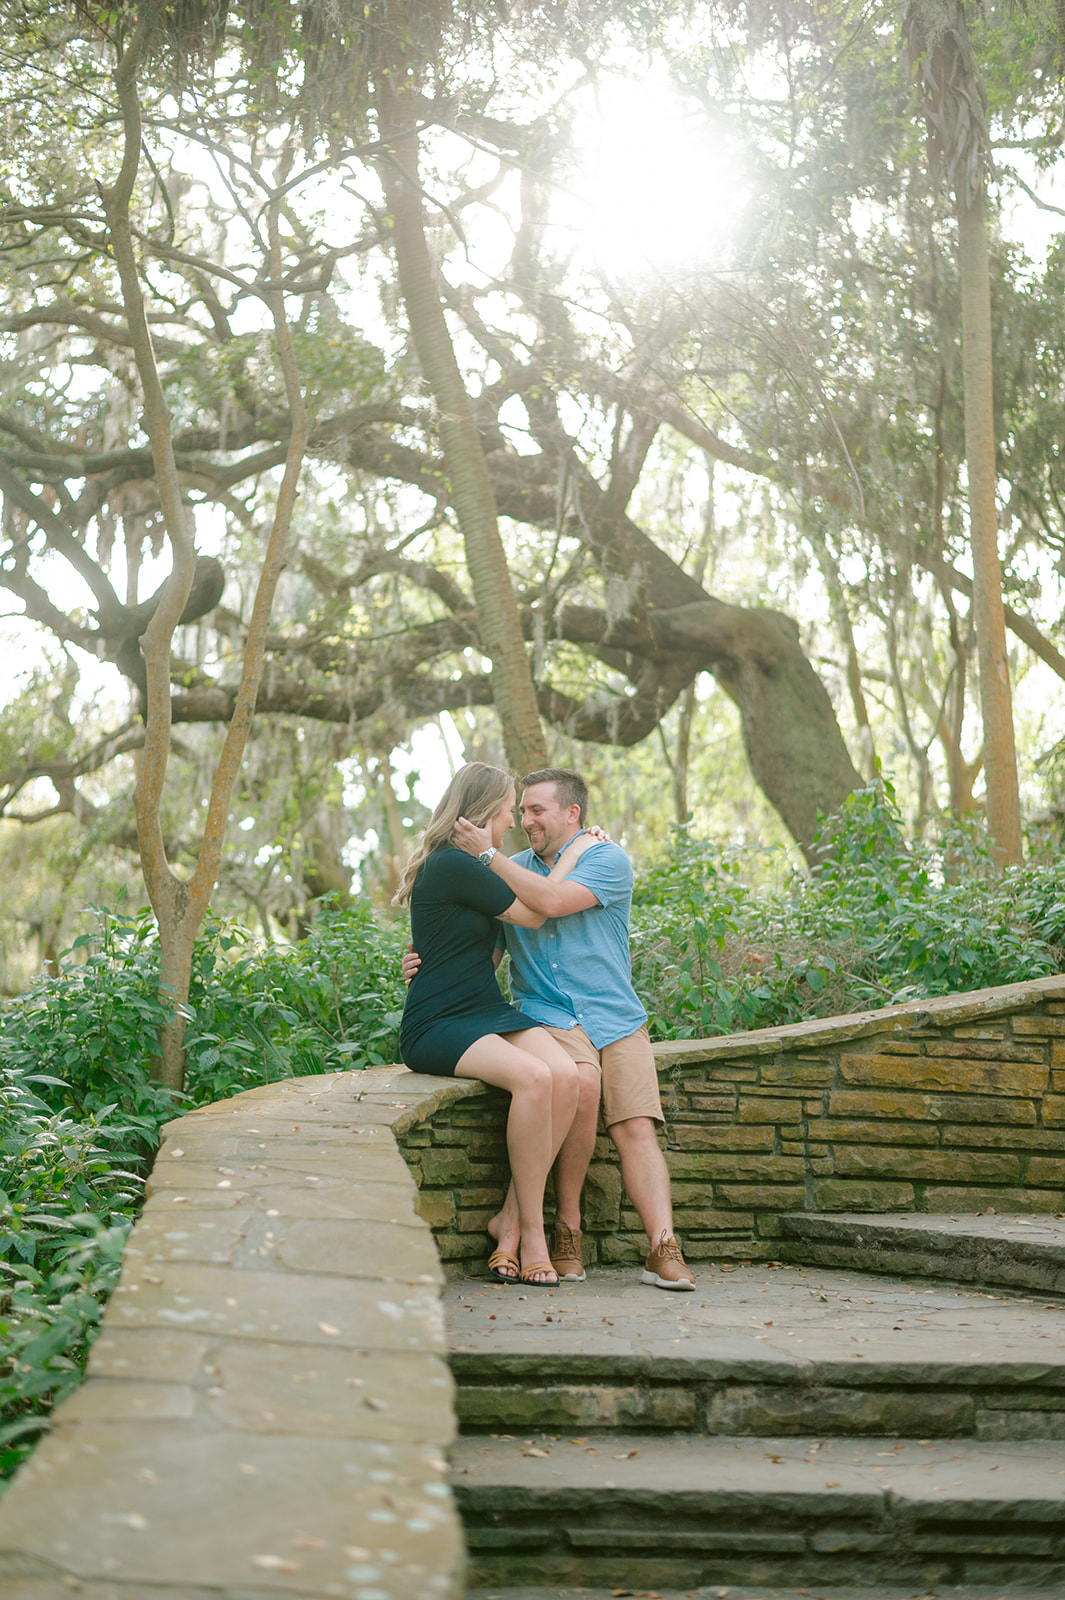 "Romantic engagement photo with natural lighting in Tampa"
